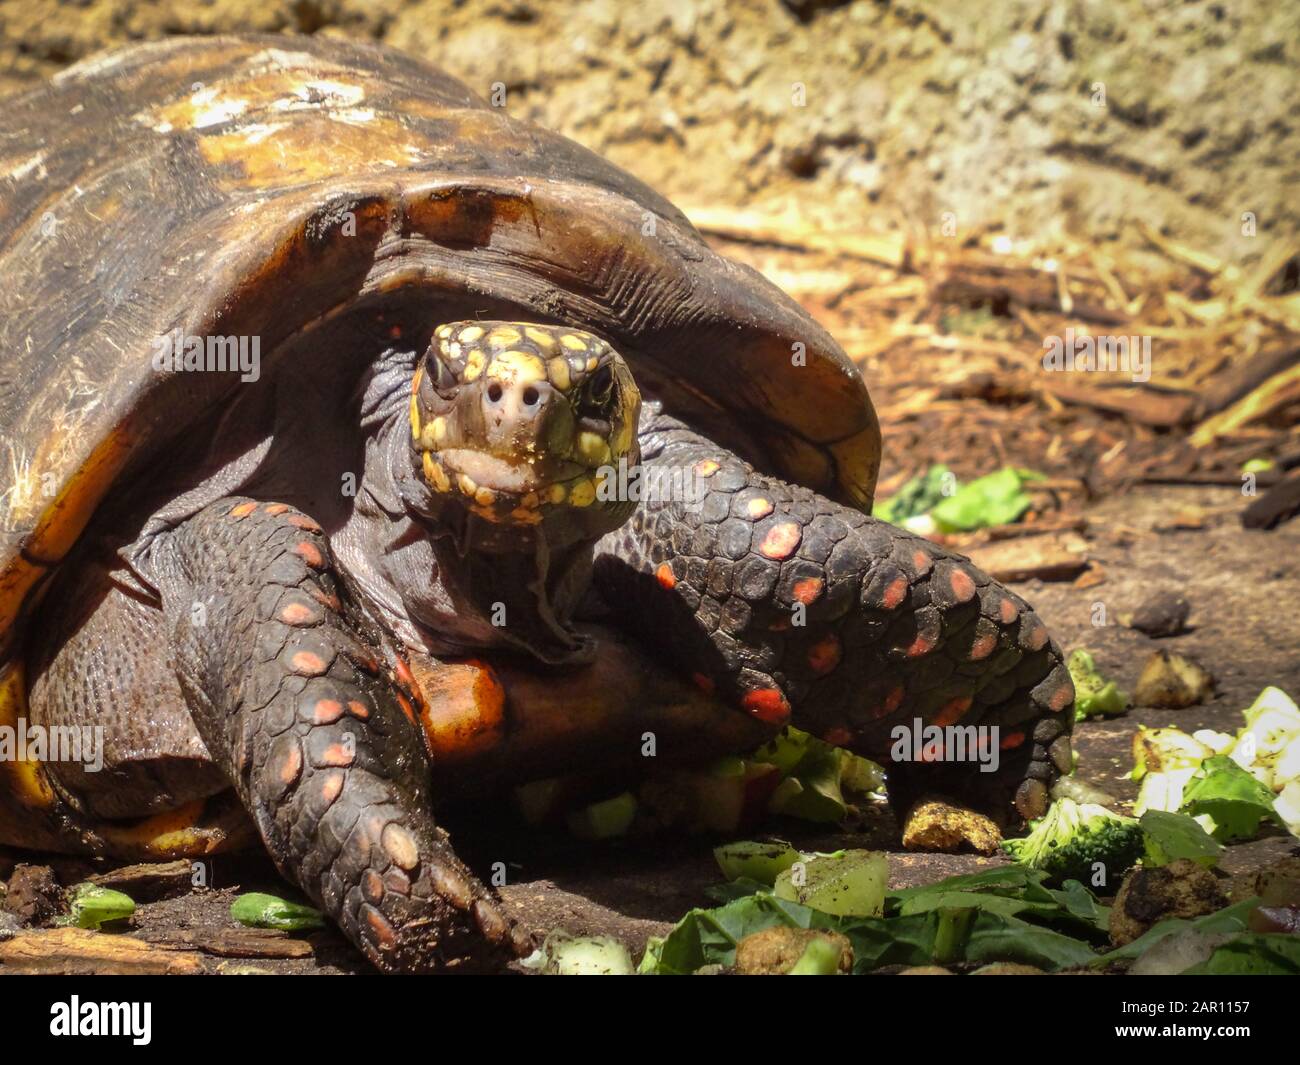 Closeup of hungry tortoise with beautiful sheel and yellow scales looking directly at camera. Sunny daylight shot of majestic reptile animal. Stock Photo